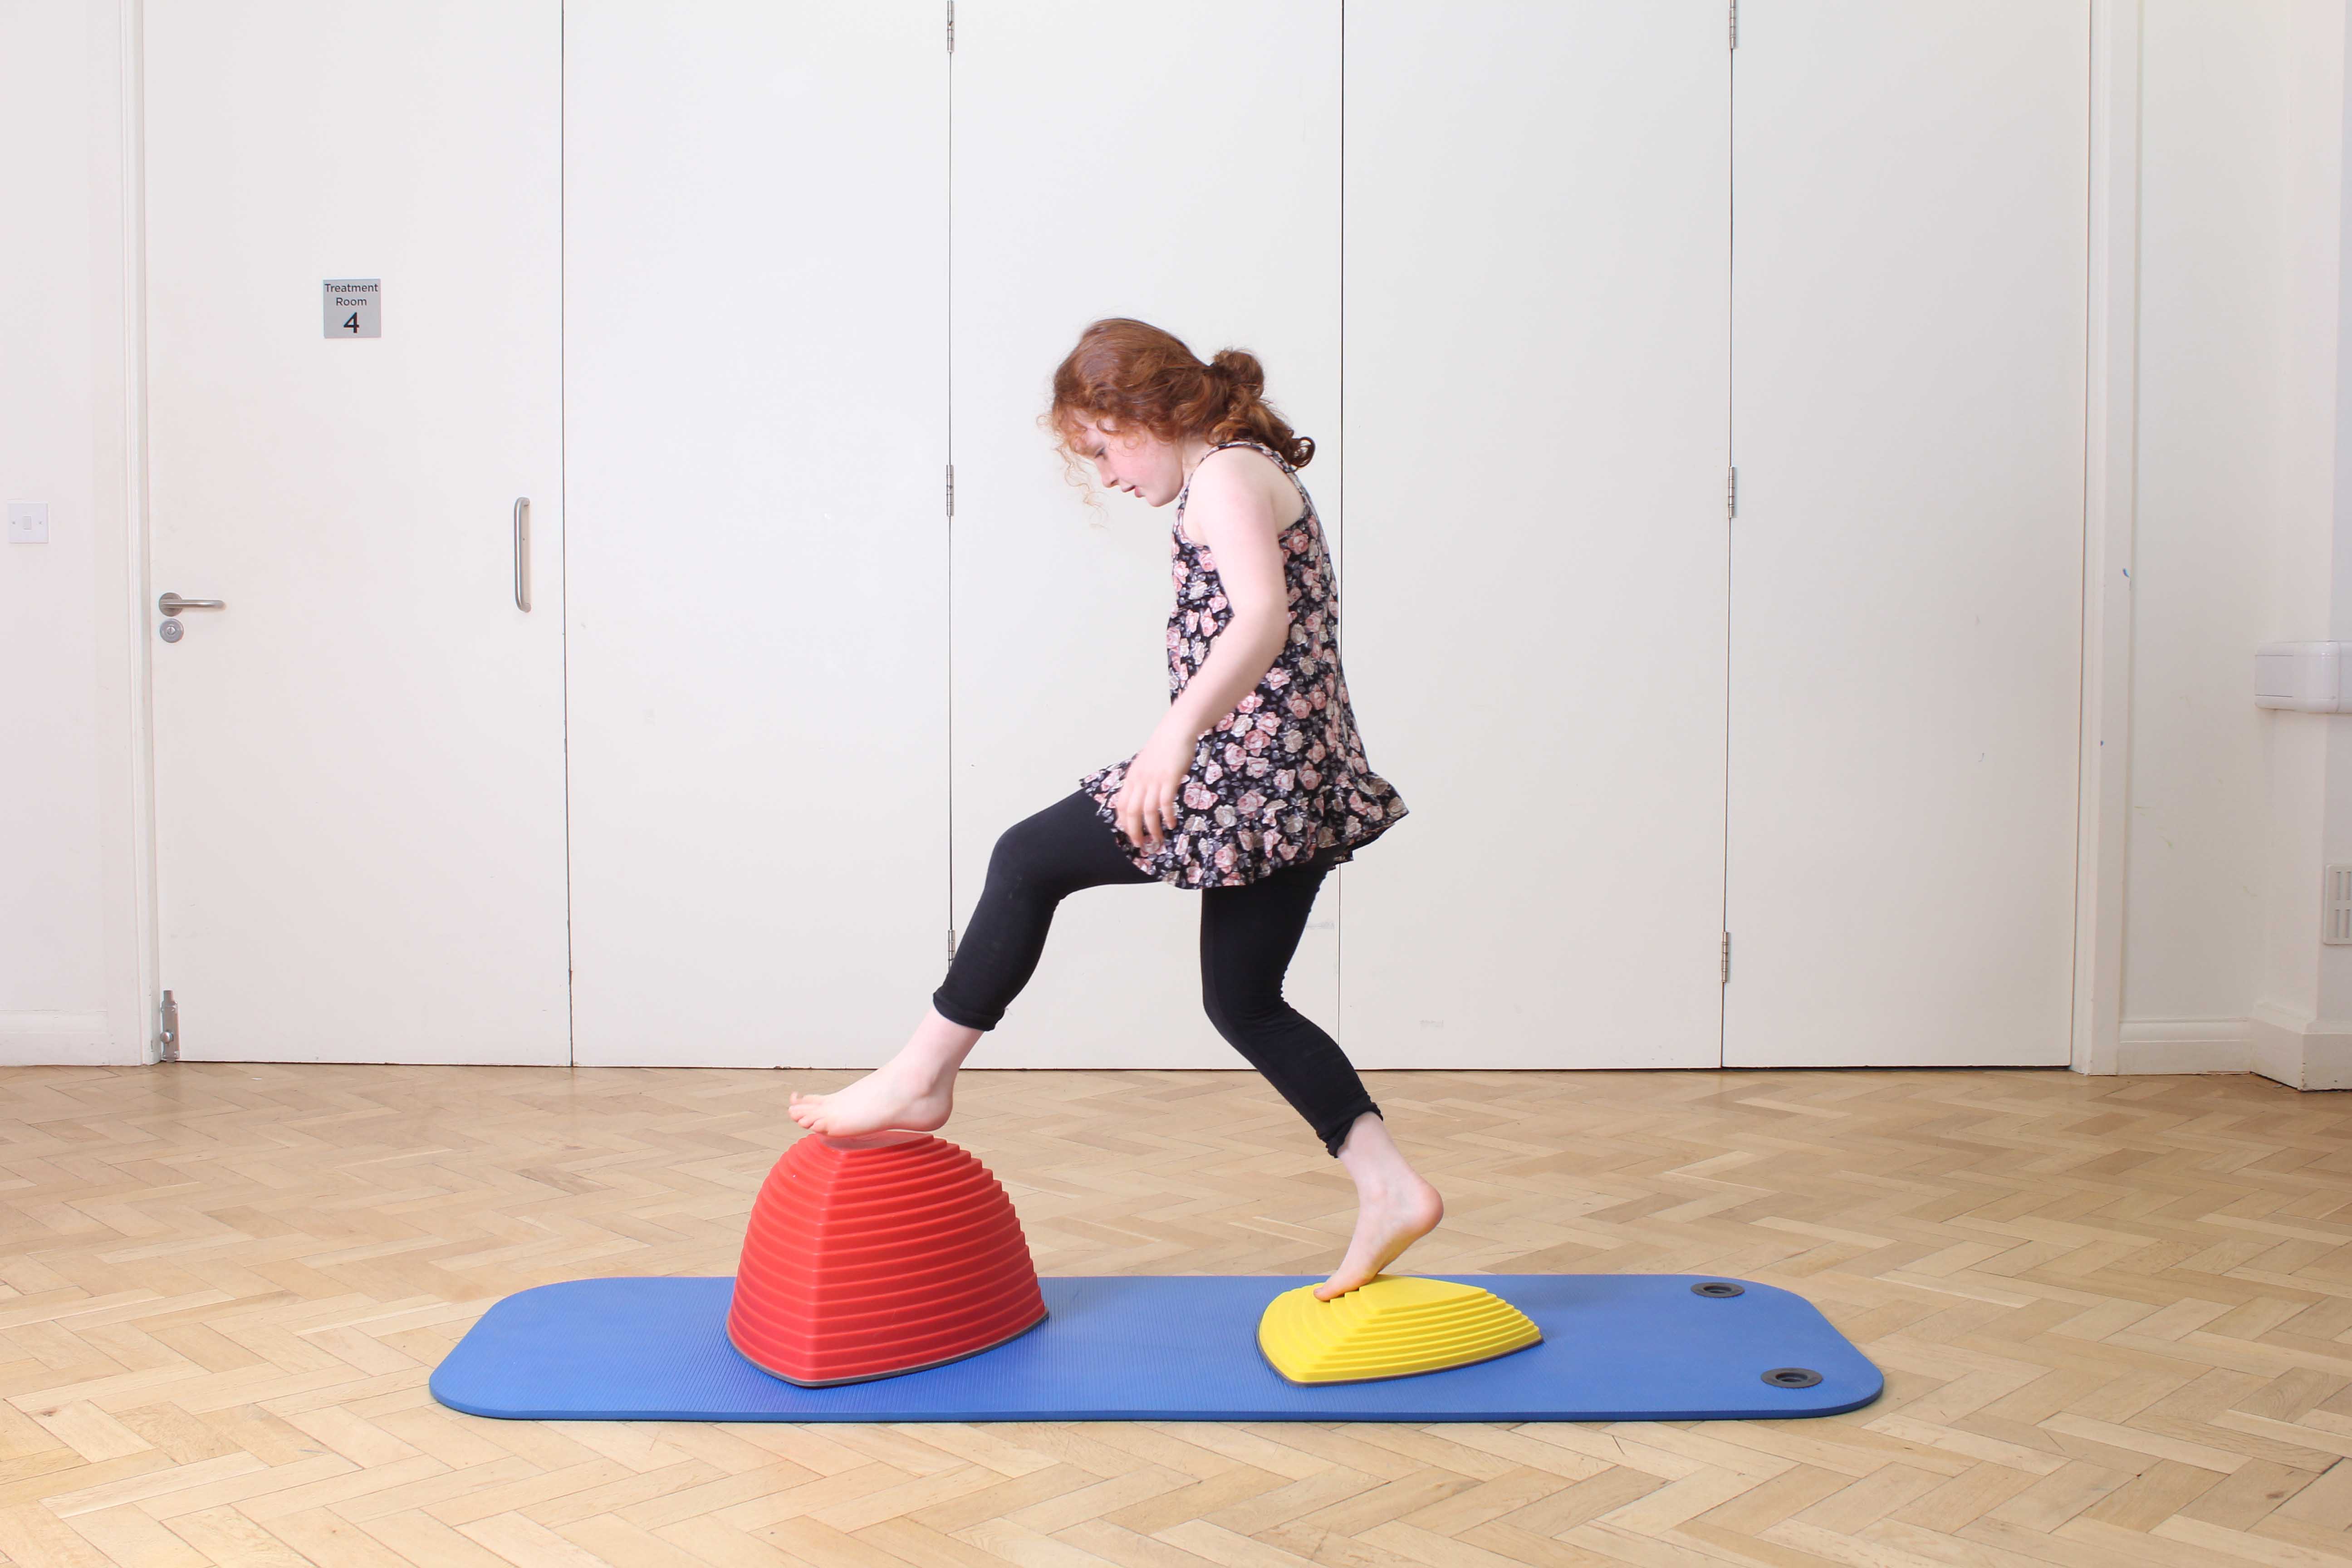 Functional mobility exercises assisted by an experienced paediatric physiotherapist